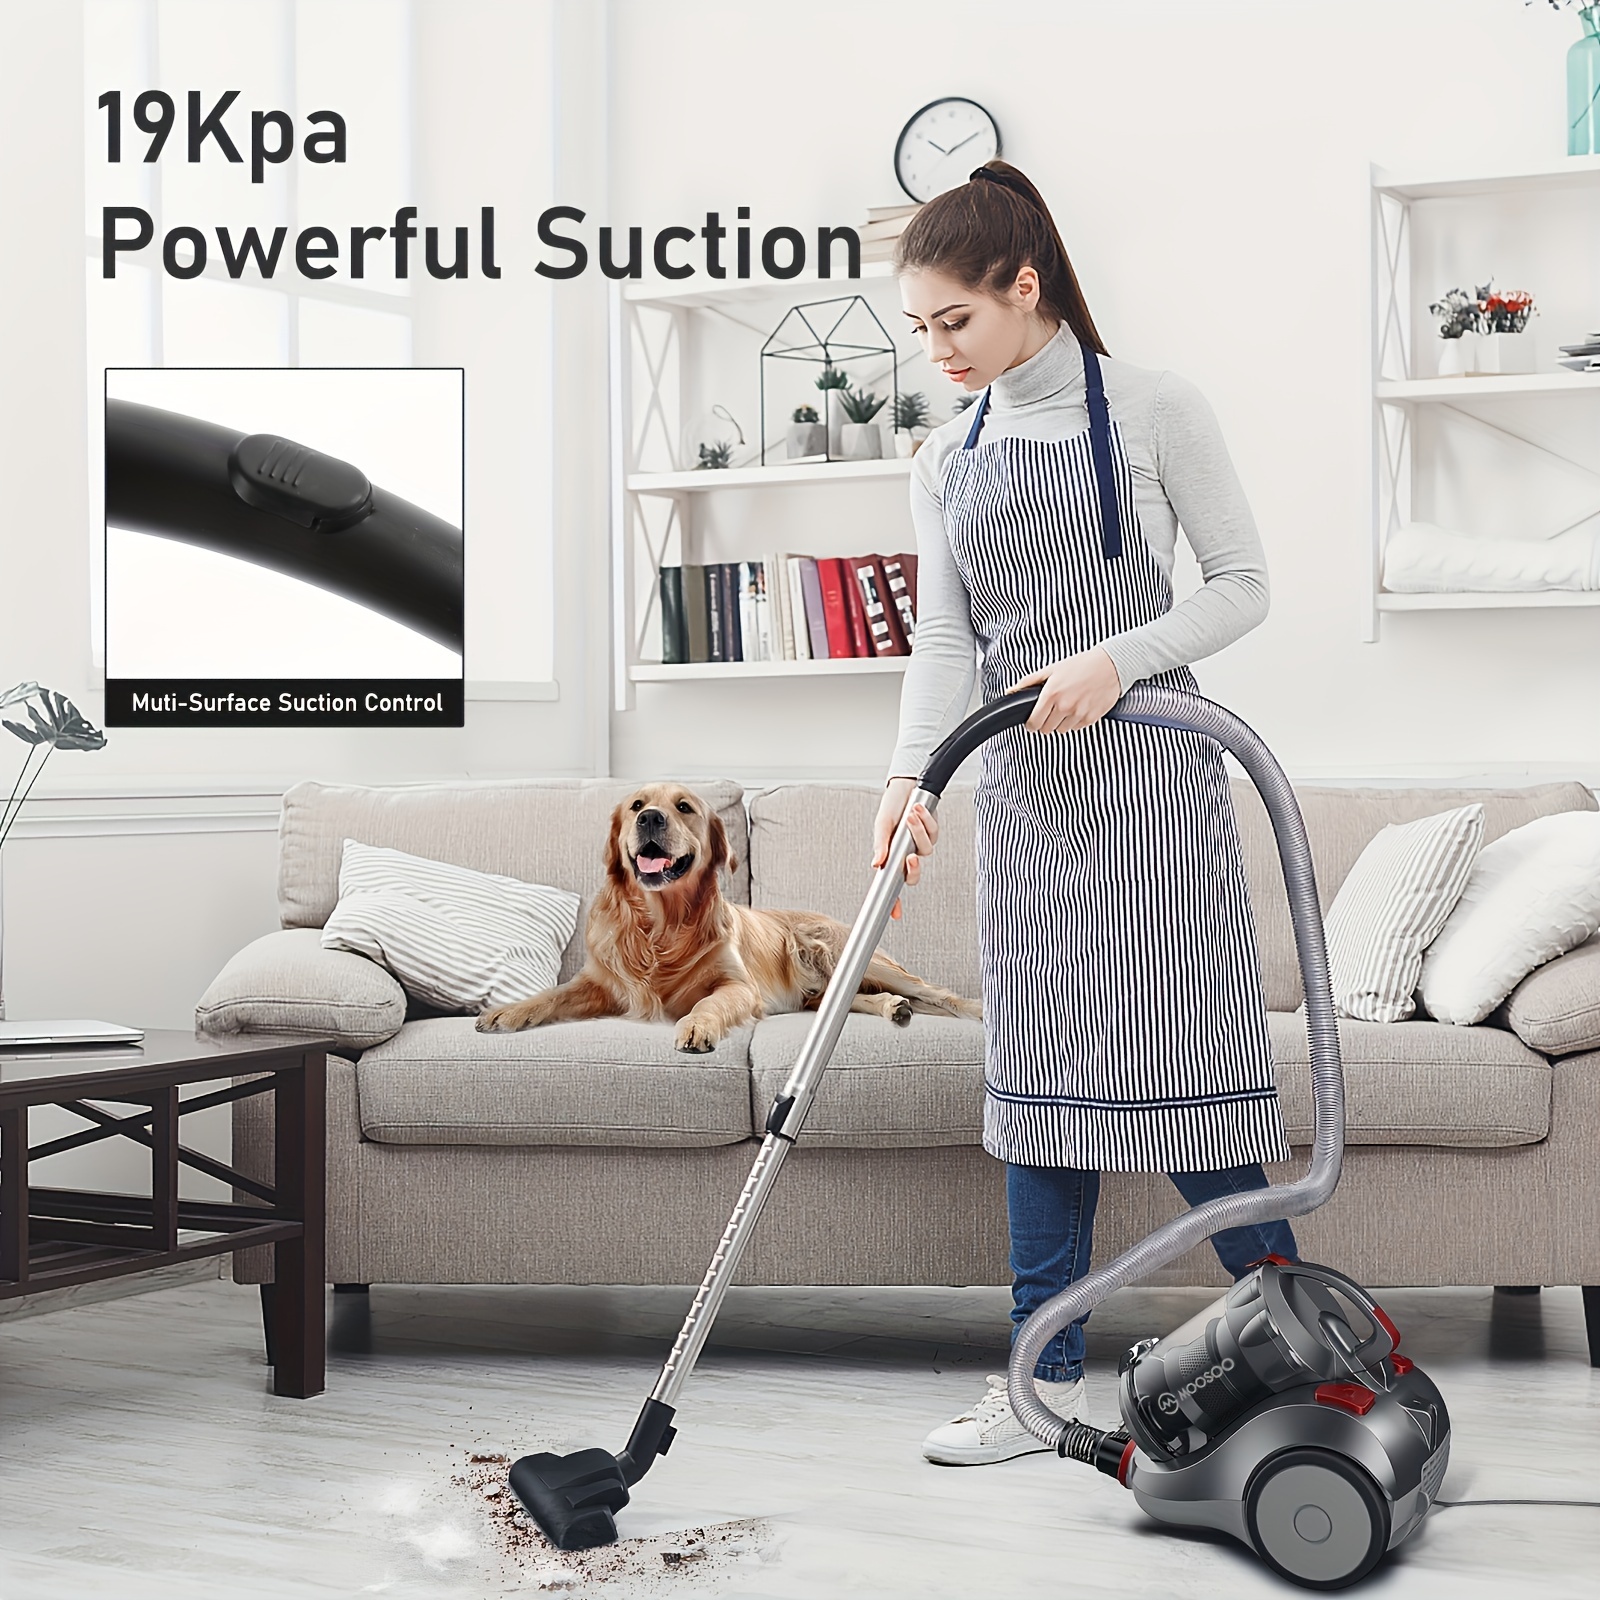 

Moosoo Ms155 Bagless Canister Vacuum Cleaner, 1.5l Lightweight Vac For Carpets And Hard Floors